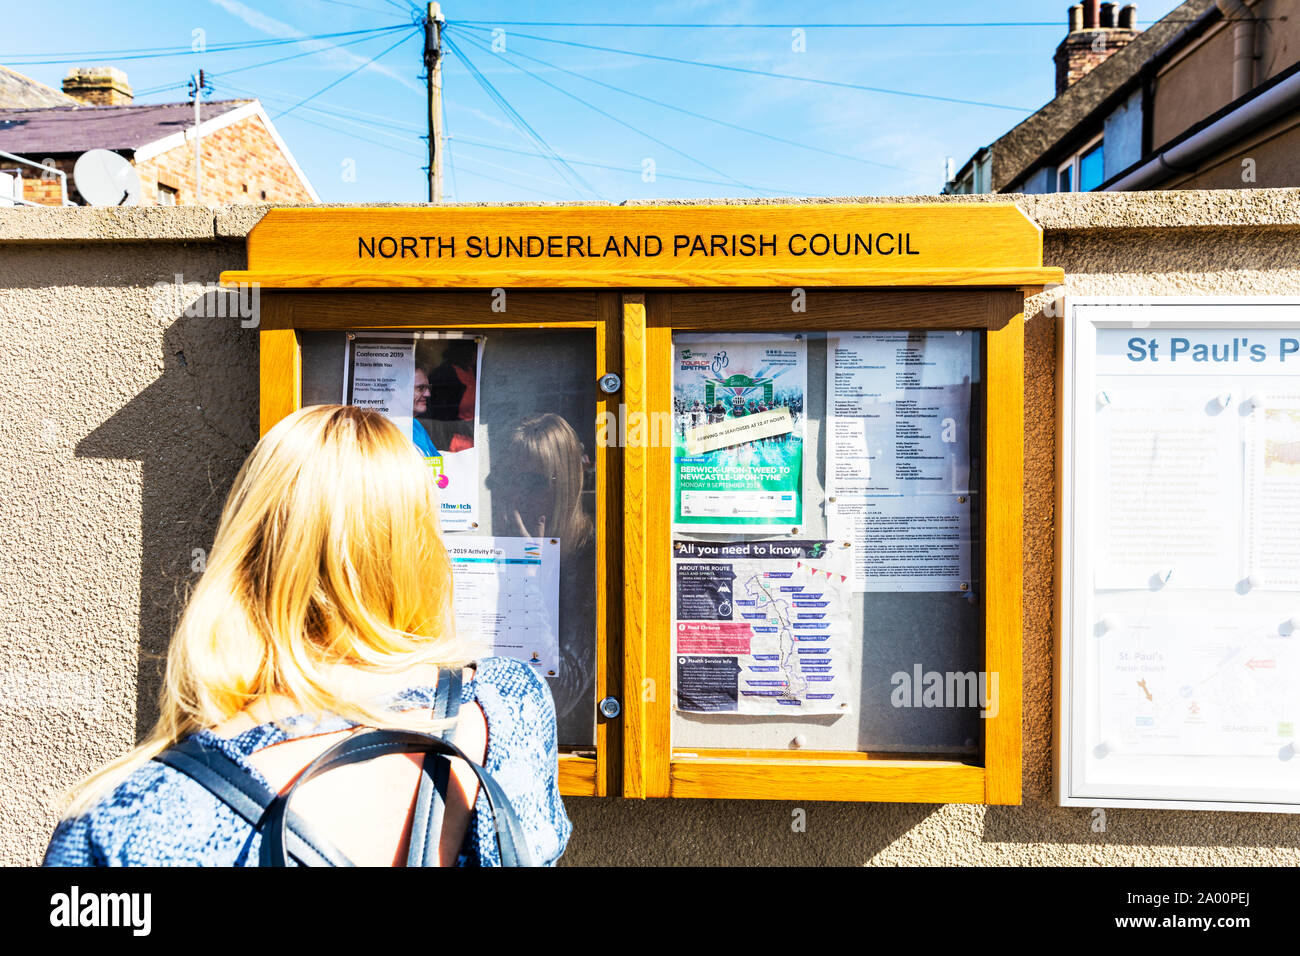 Seahouses Northumberland notice board, North Sunderland and parish council notice board, Seahouses town Northumberland, UK, England Stock Photo